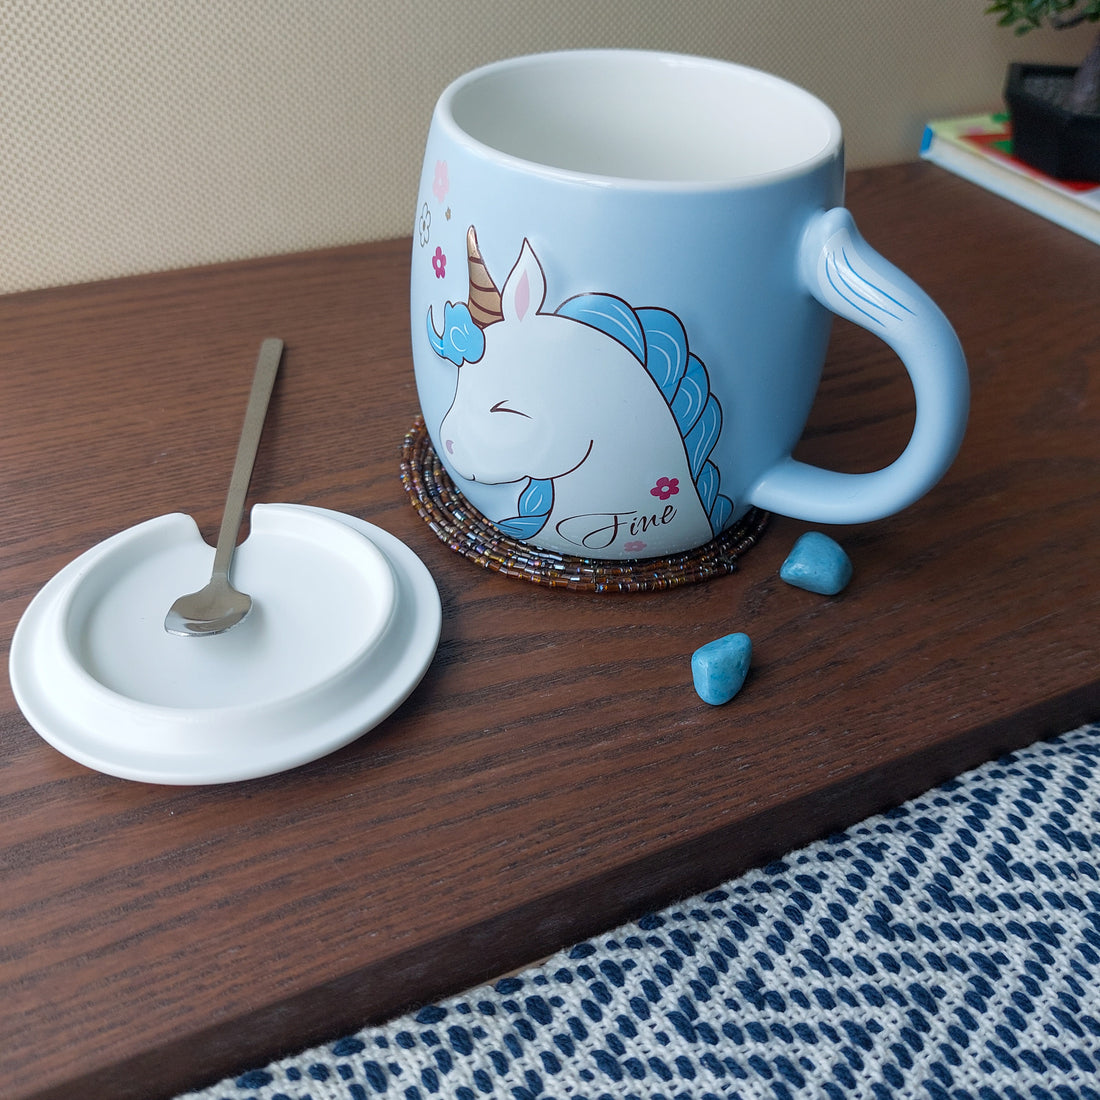 Unicorn Ceramic Mugs with Spoon and Lid